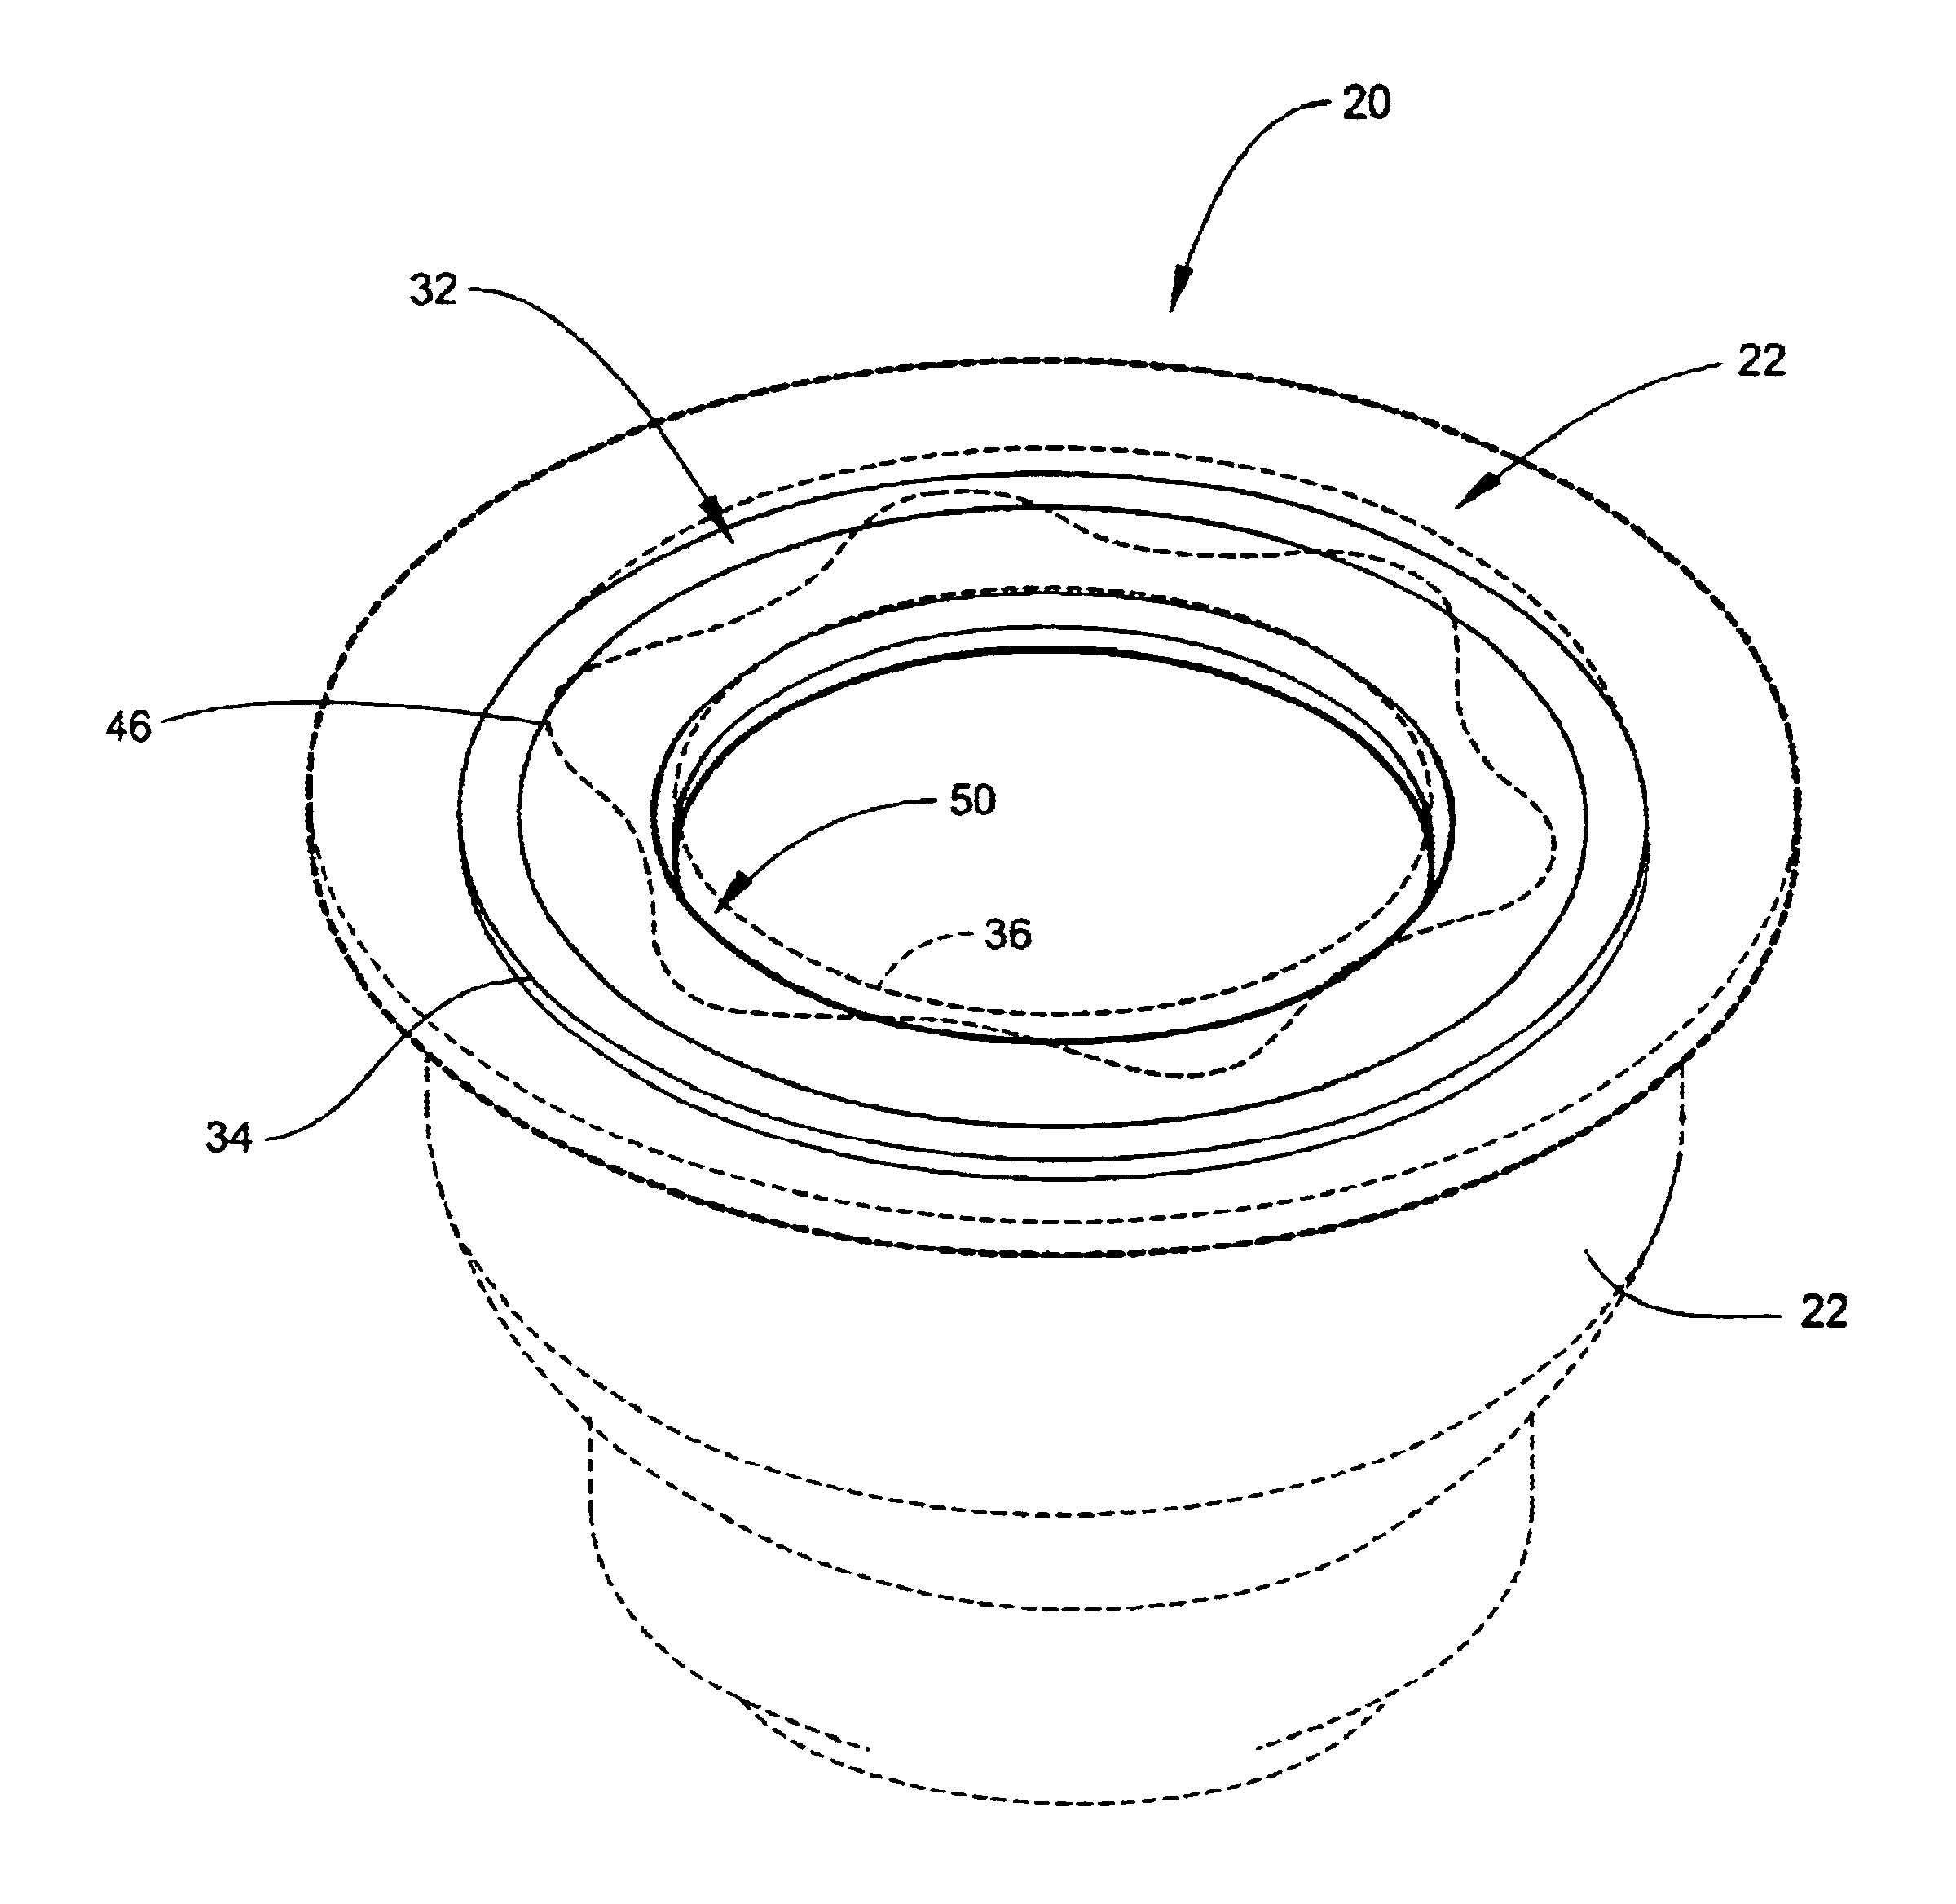 Tangential stress reduction system in a loudspeaker suspension